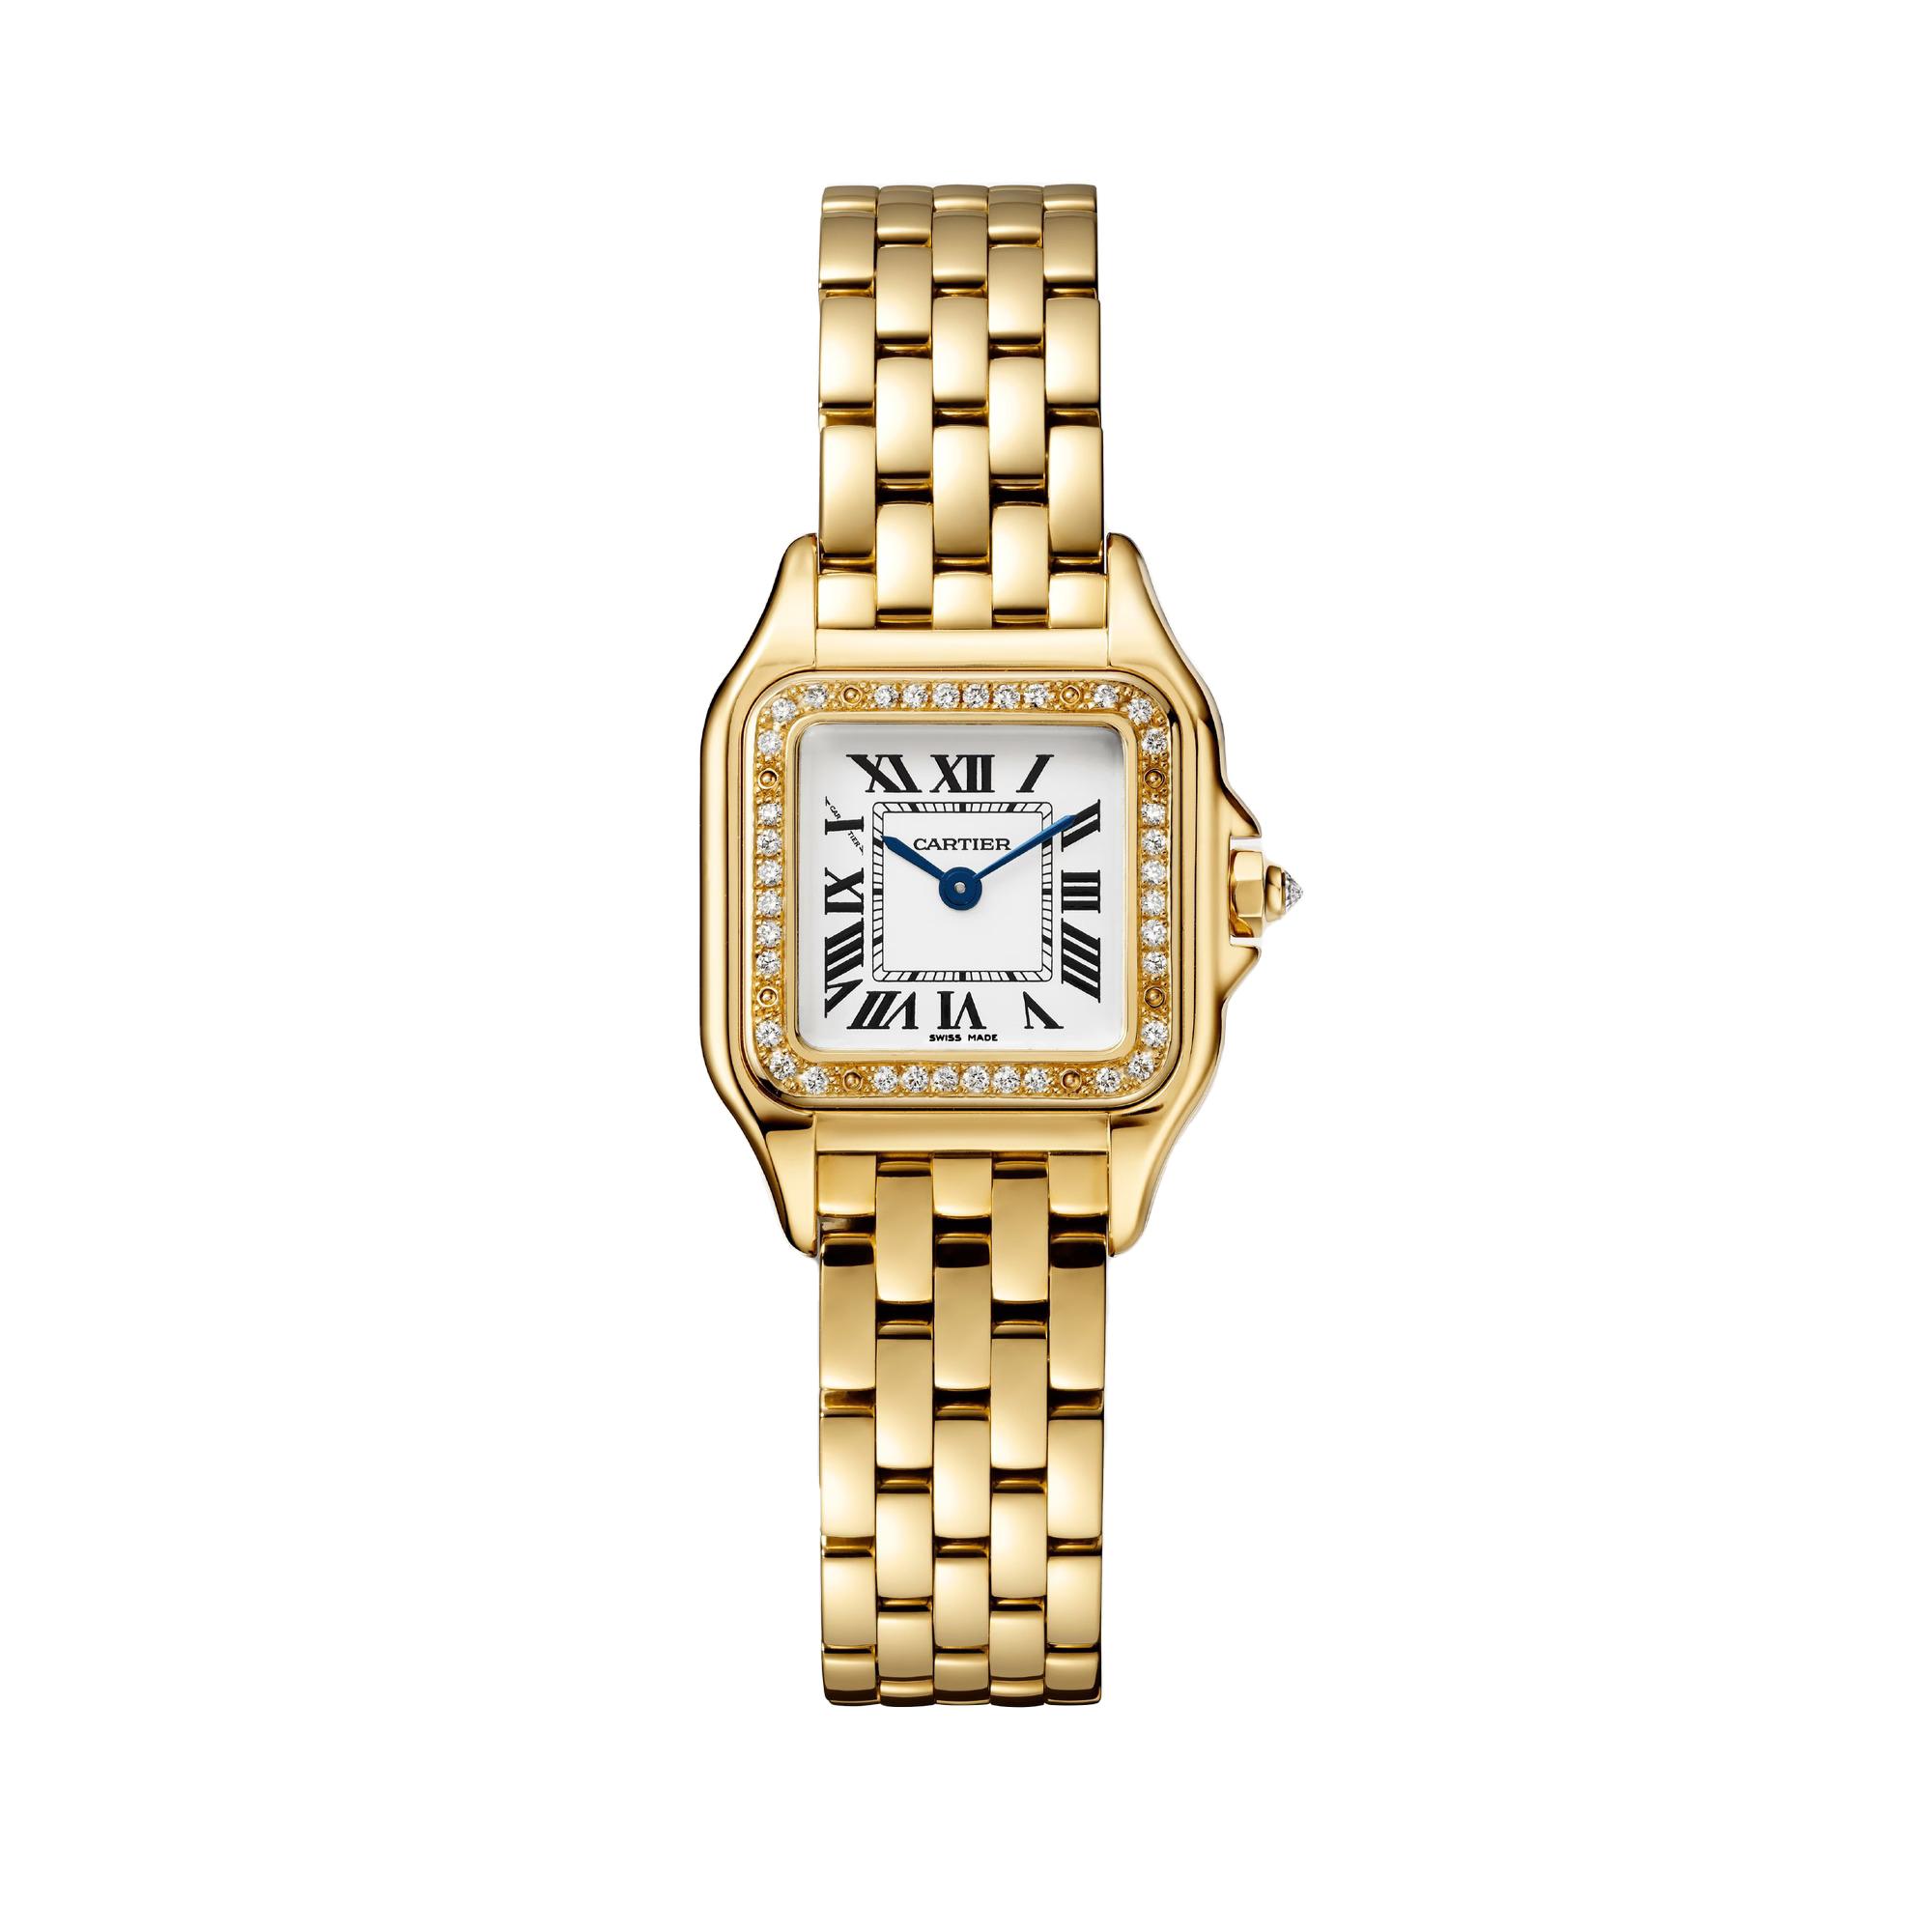 Panthere de Cartier Watch in Yellow Gold with Diamonds, small model